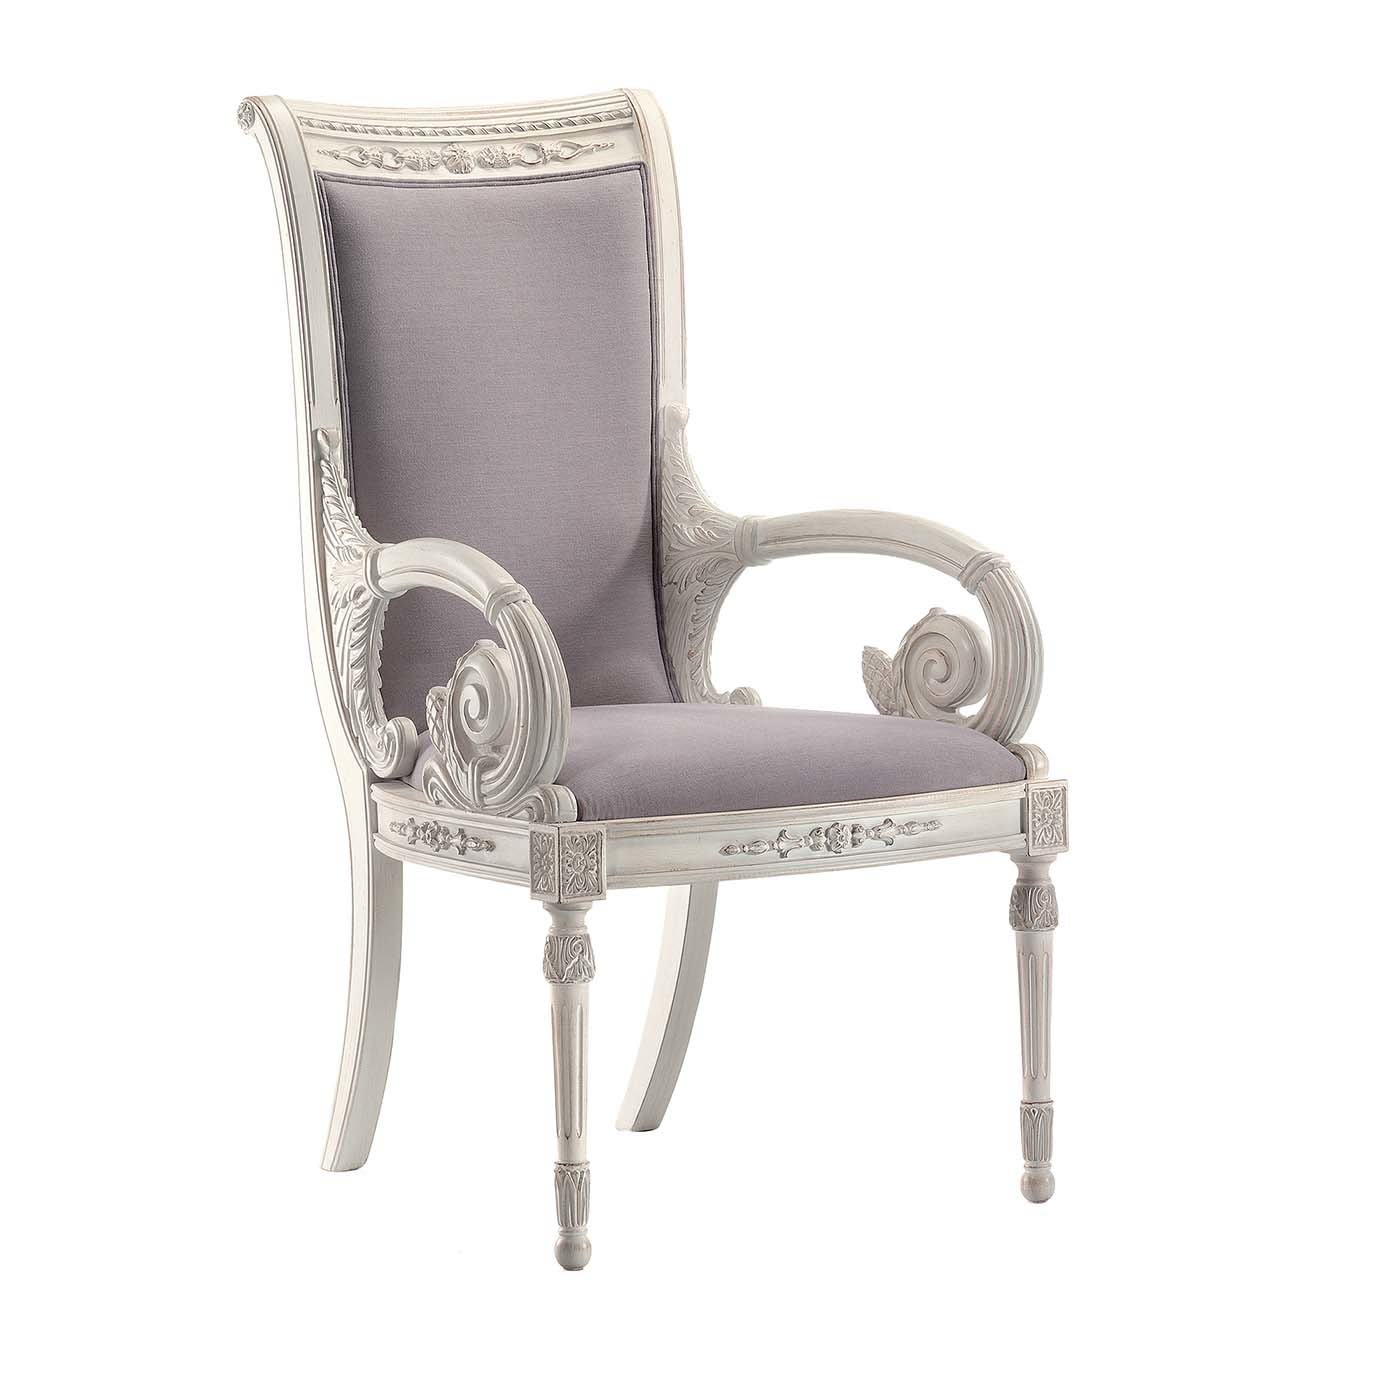 Capotavola White Chair with Armrests - Modenese Gastone